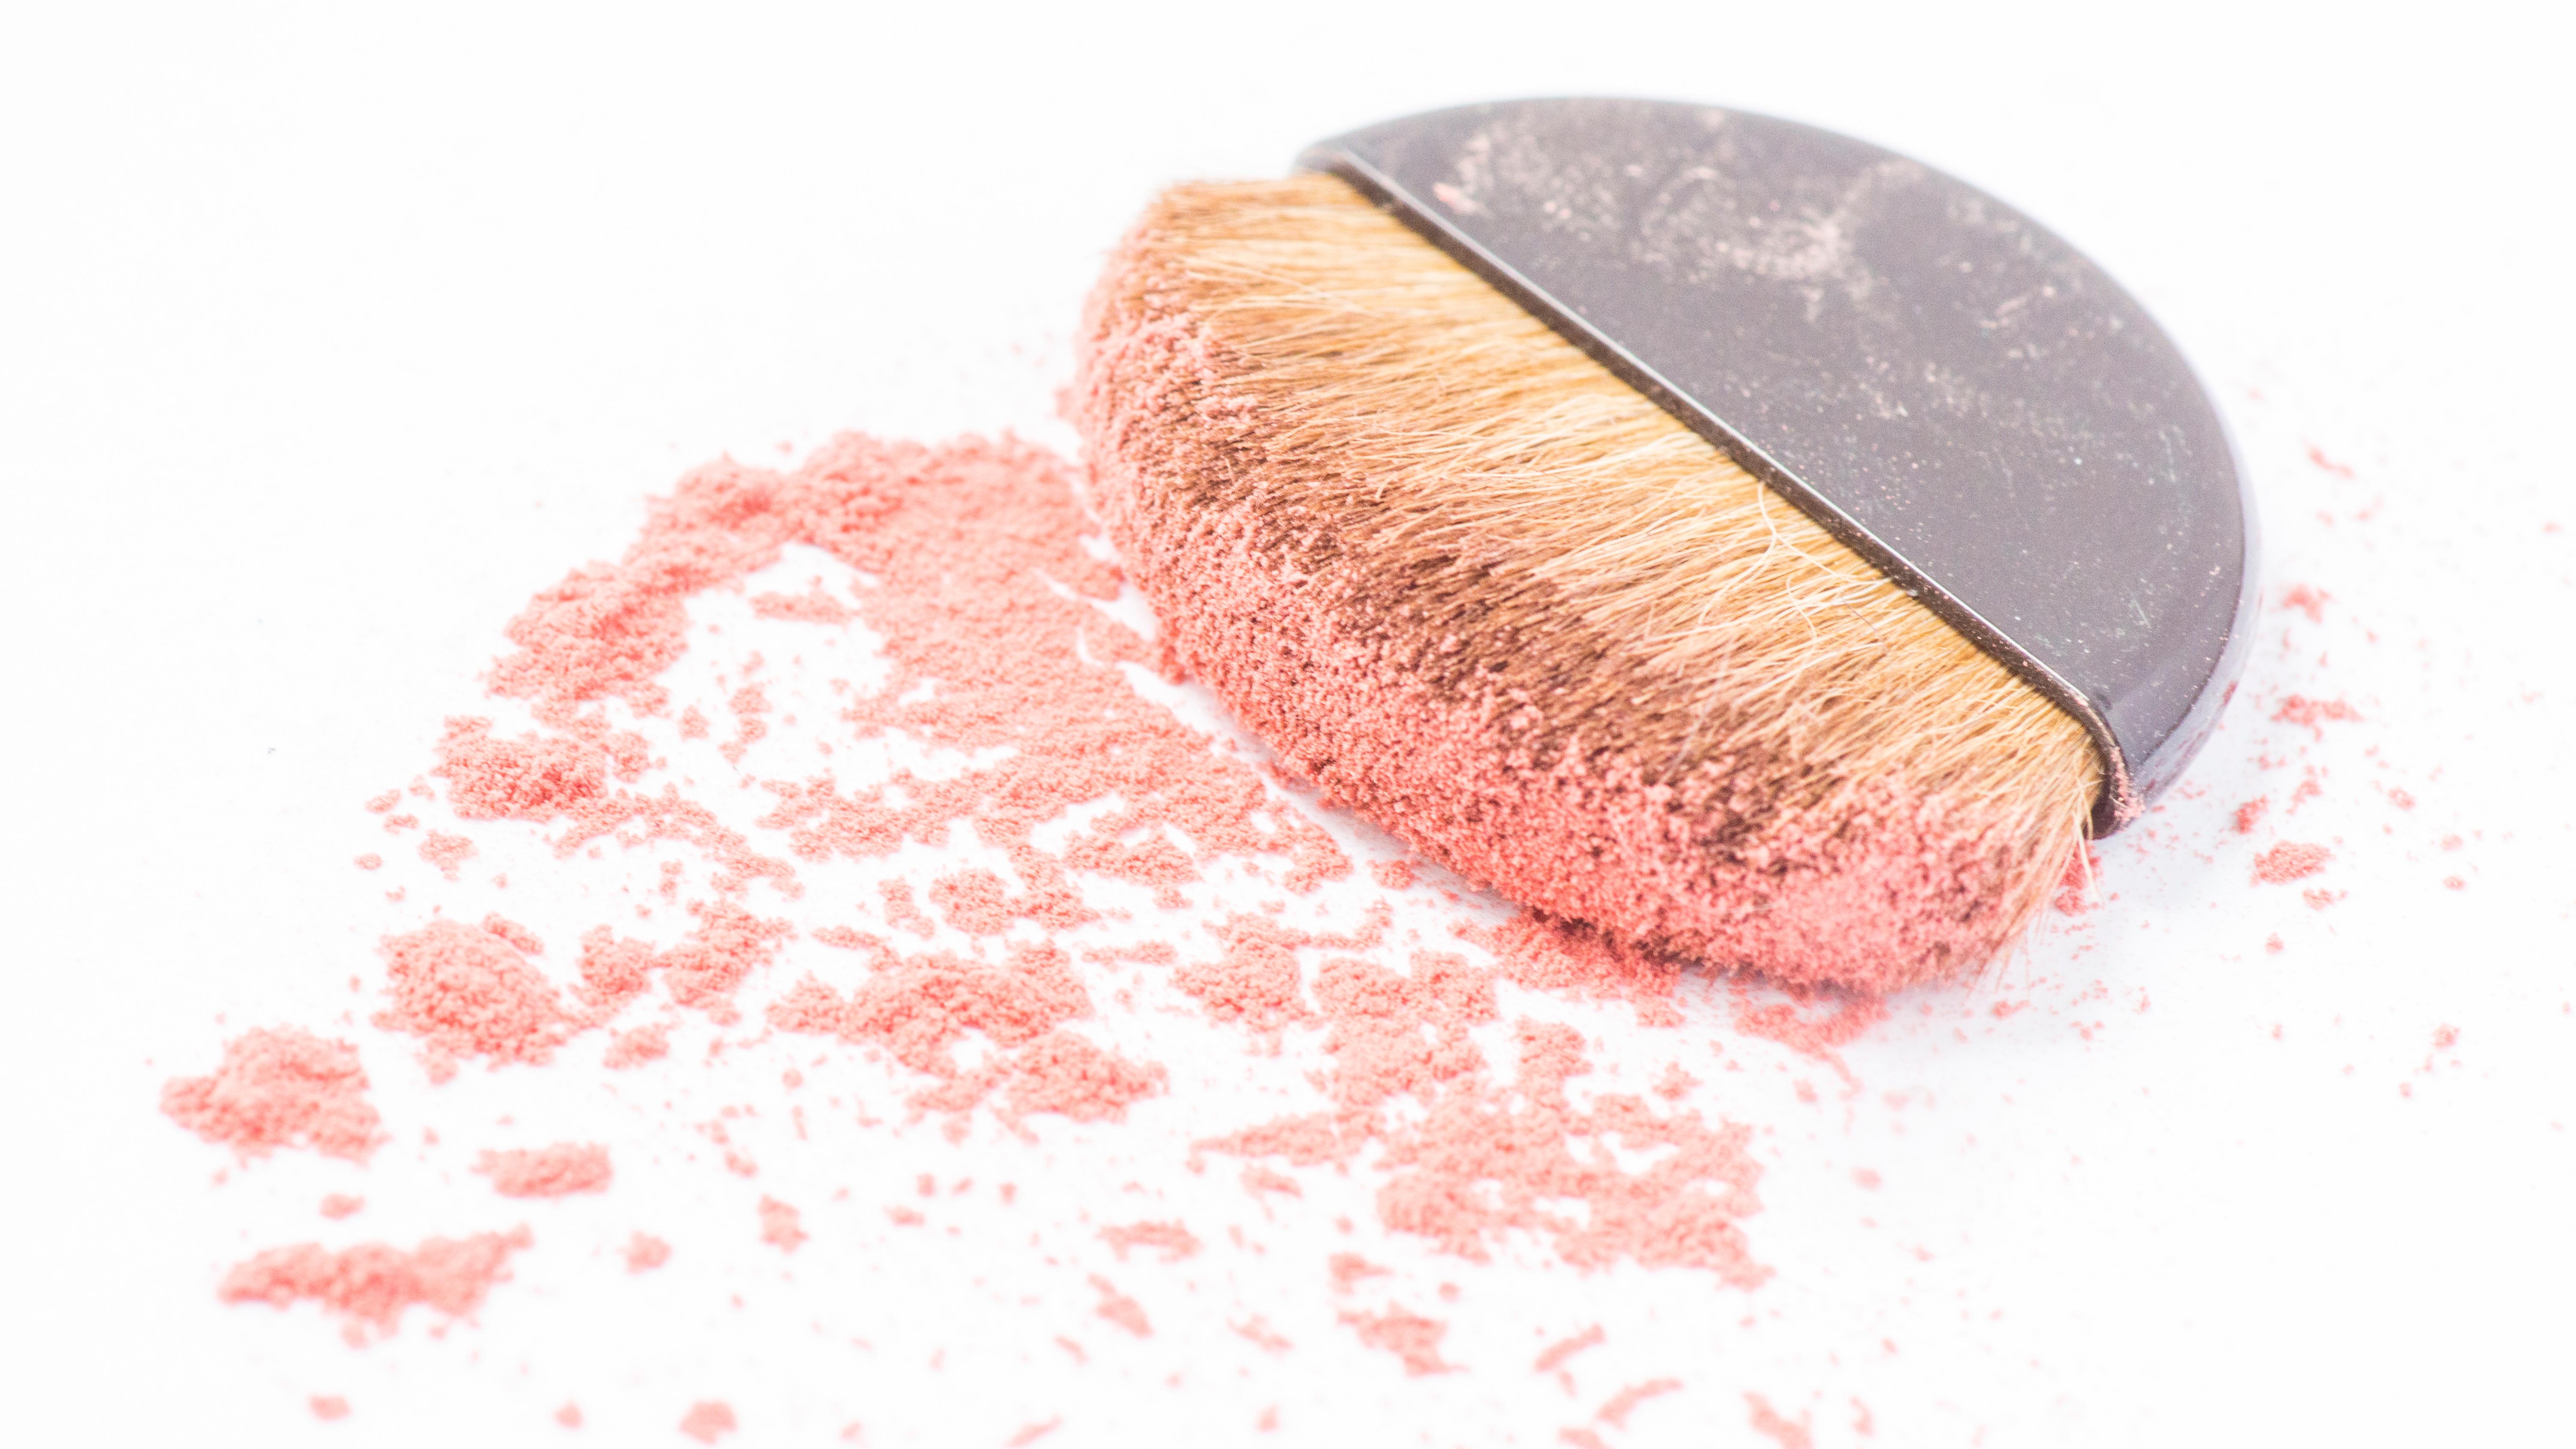 What Is Mica Powder & Is Mica In Makeup Safe?